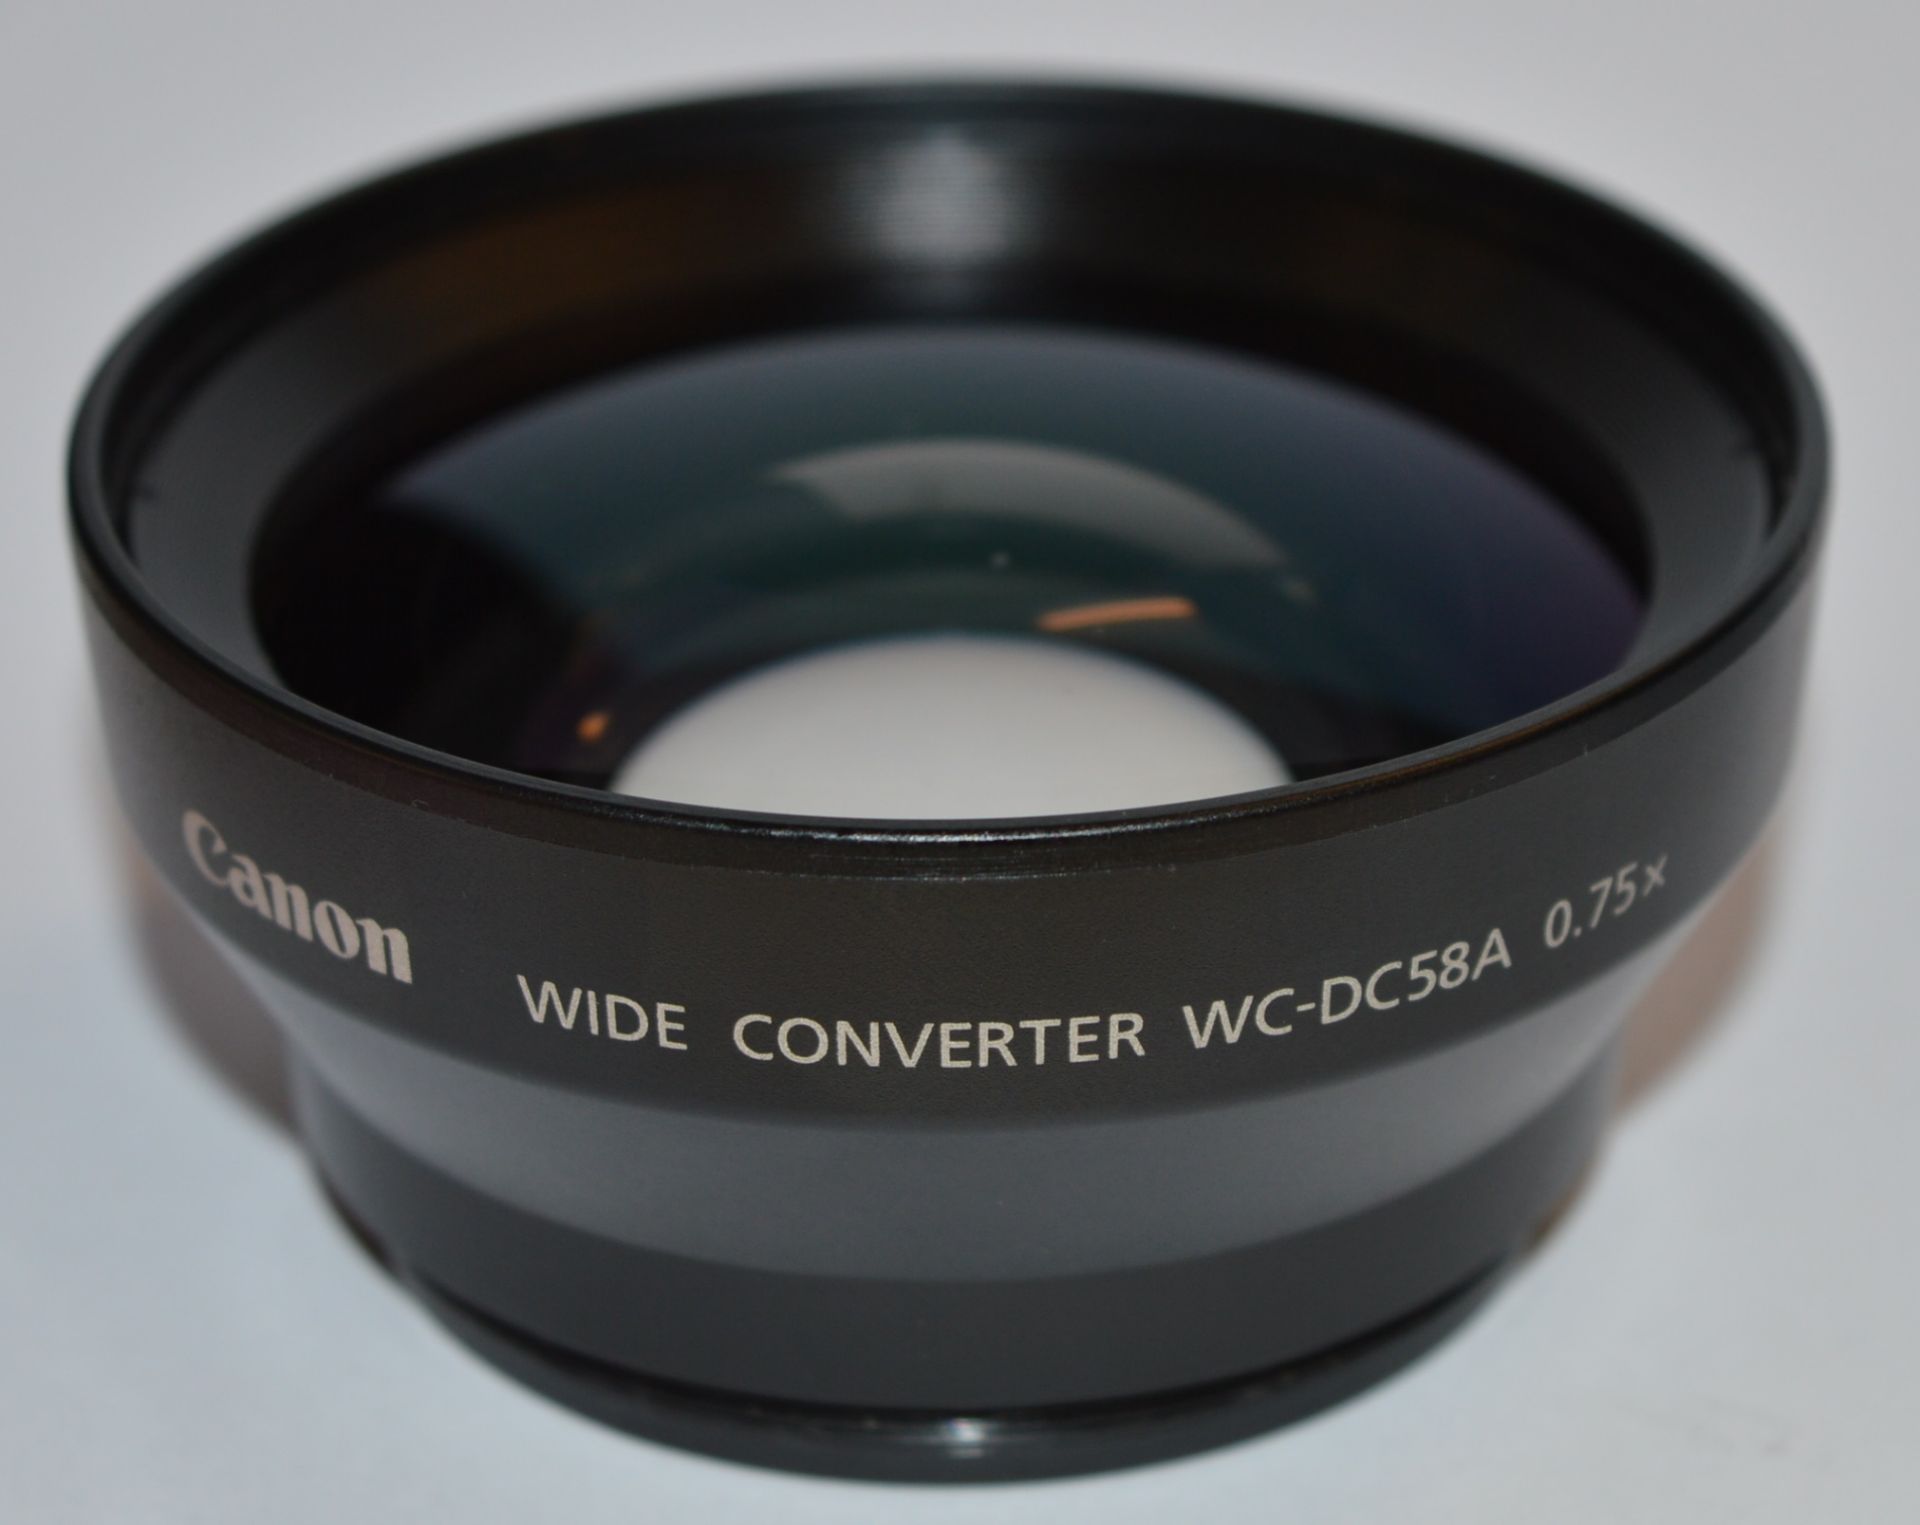 1 x Canon WC-DC58A 0.75x Wide Angle Converter Lens - CL011 - Ref JP137 - Very Good Condition - - Image 5 of 6